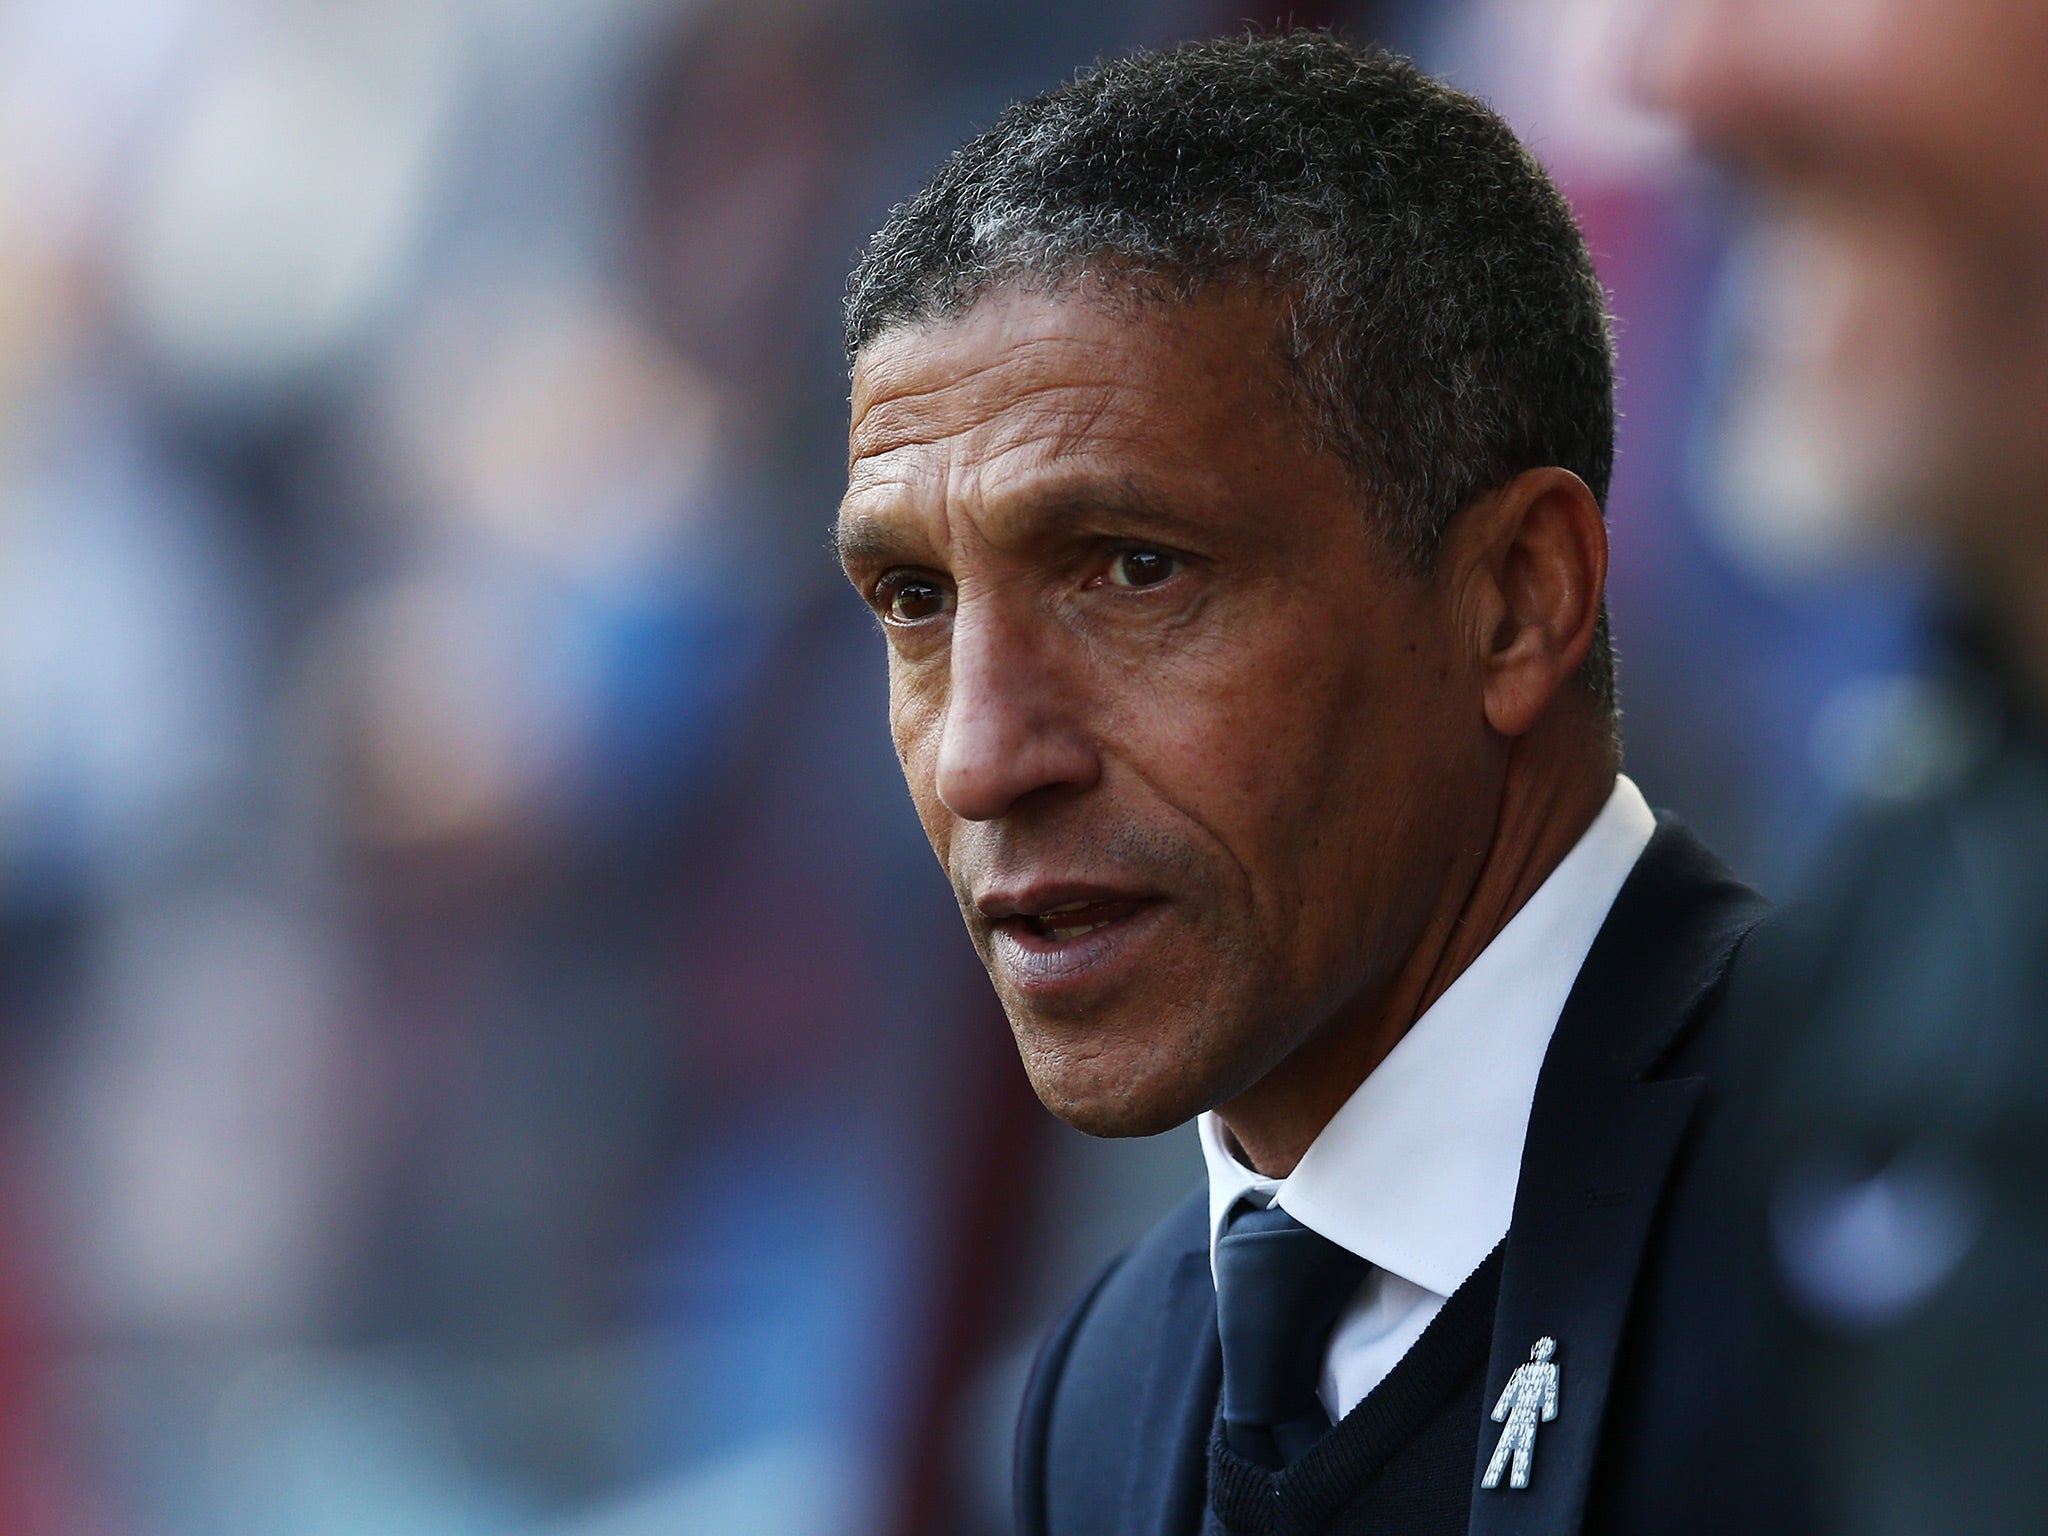 Chris Hughton led Brighton and Hove Albion to promotion from the Championship last season